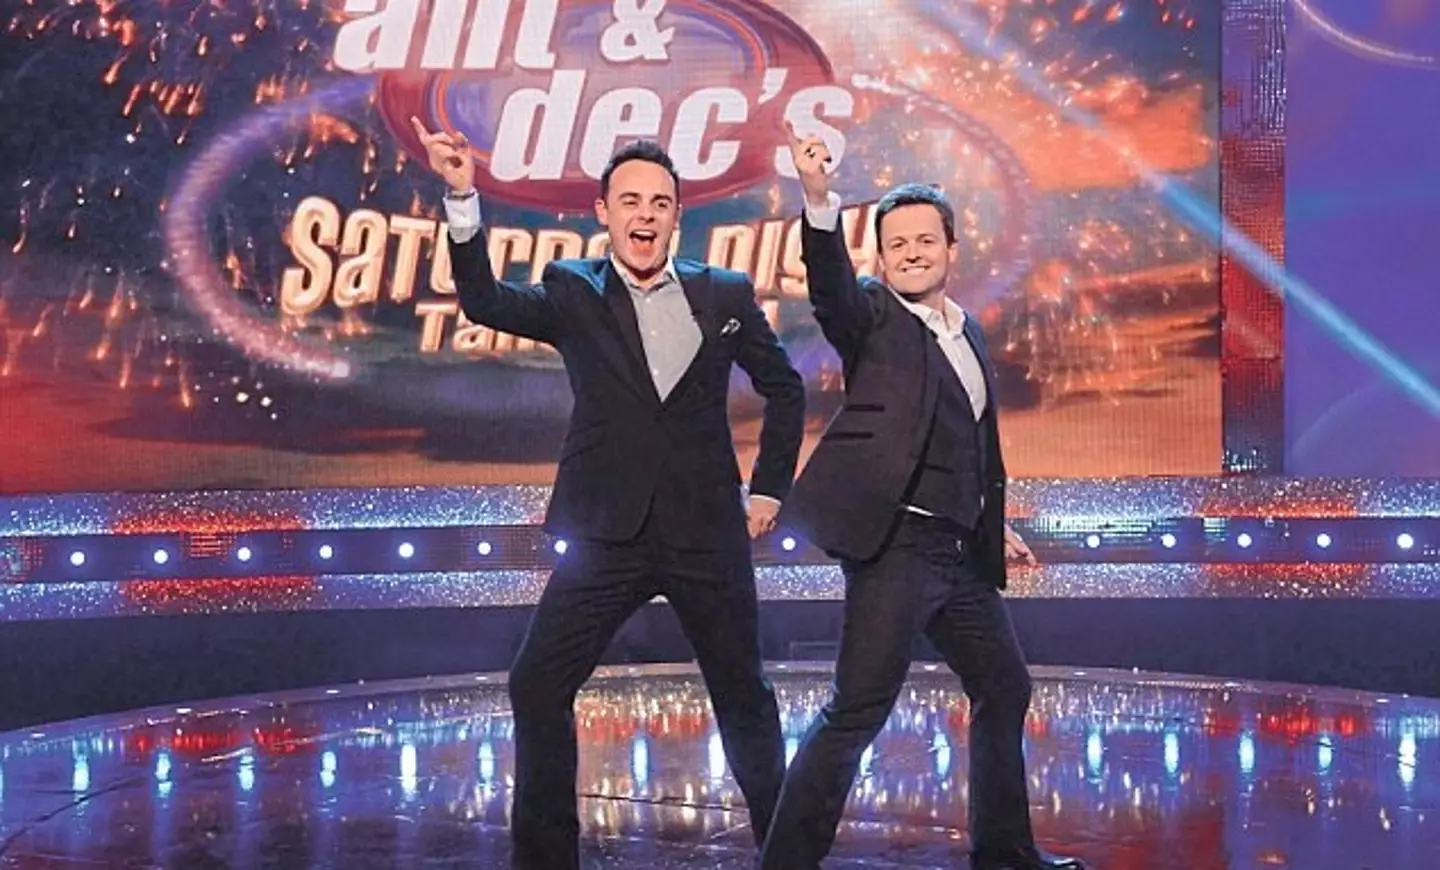 Ant and Dec have presented the Saturday Night Takeaway for over 20 years.